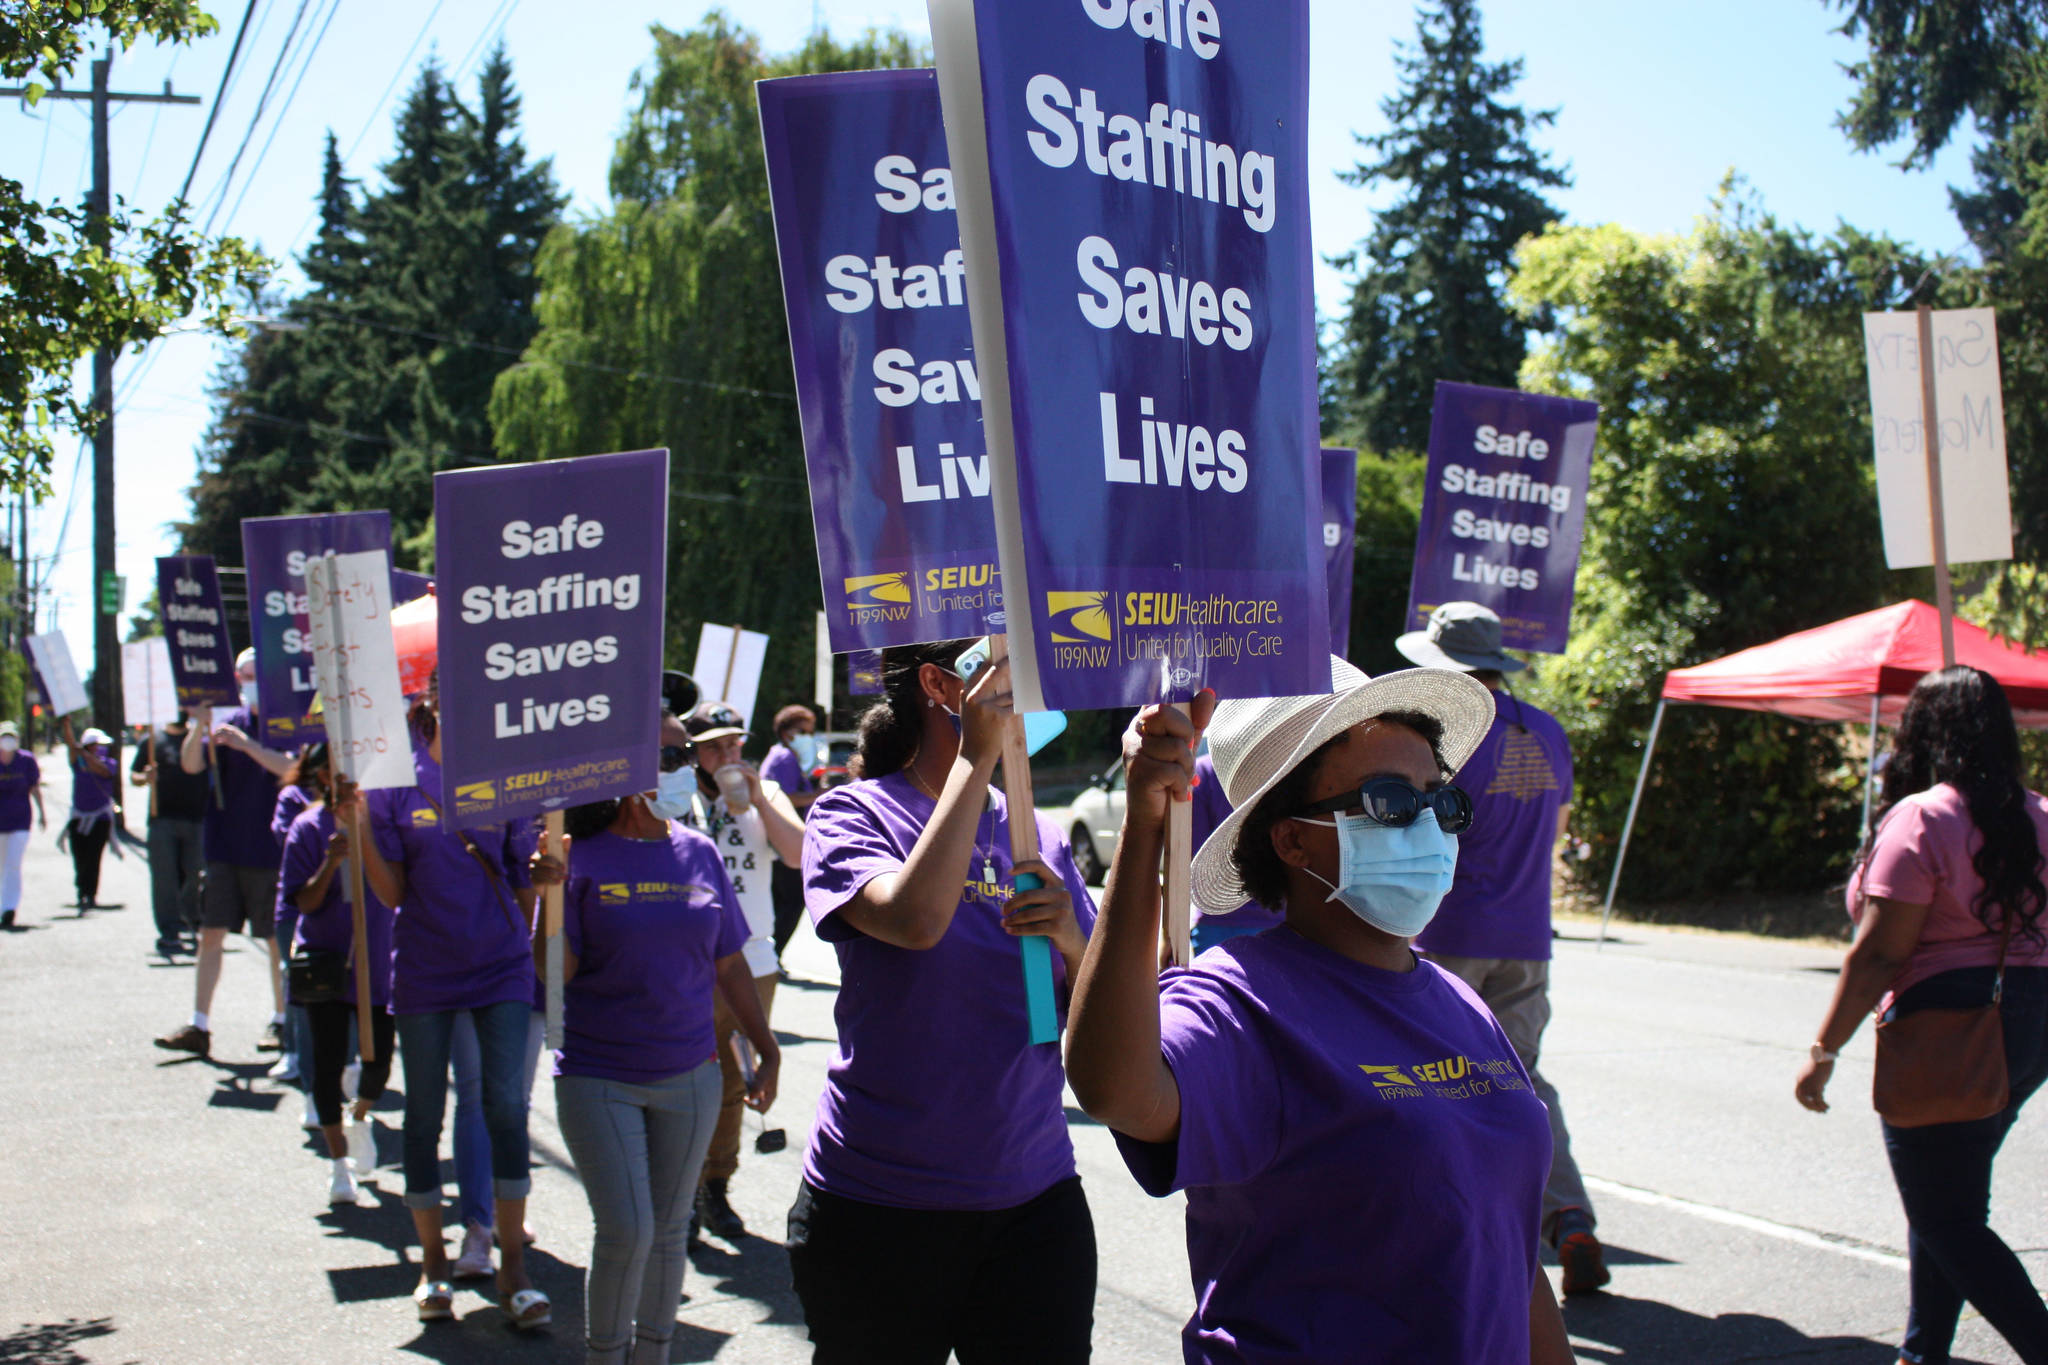 SEIU Healthcare 1199NW union workers hold a safety strike Aug. 11 after a violent patient left 11 employees injured Photo by Cameron Sheppard/Sound Publishing
SEIU Healthcare 1199NW union workers hold a safety strike Aug. 11 after a violent patient left 11 employees injured Photo by Cameron Sheppard/Sound Publishing